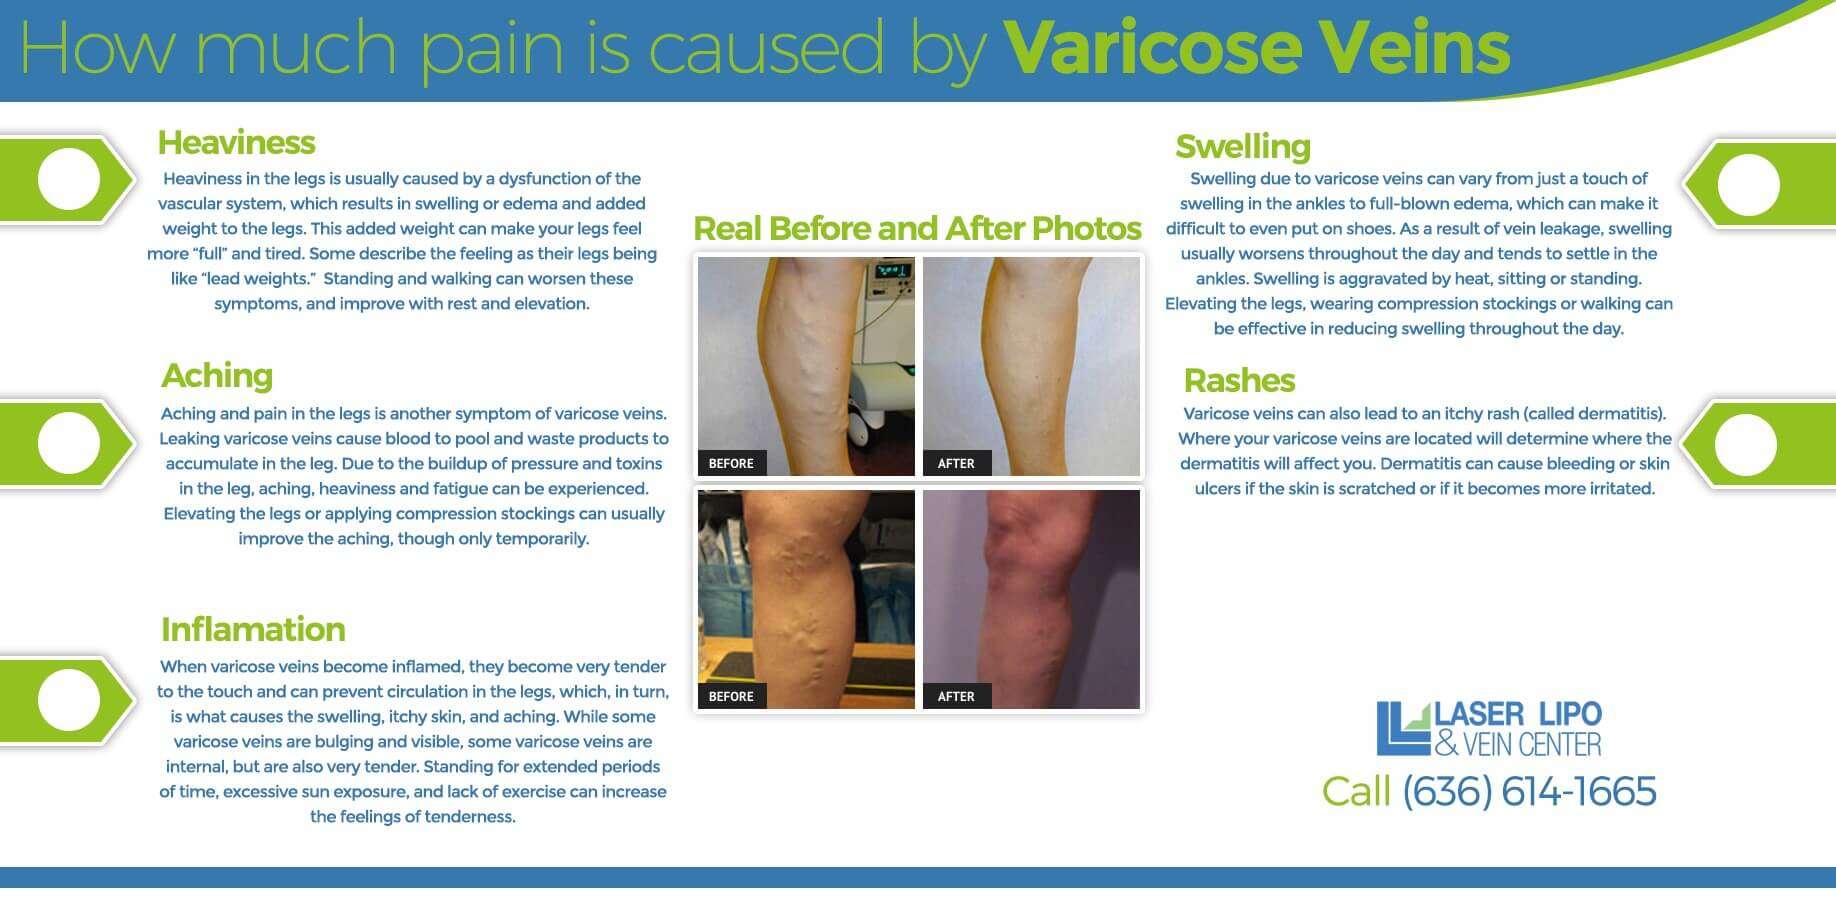 Pain of Varicose Veins Overview